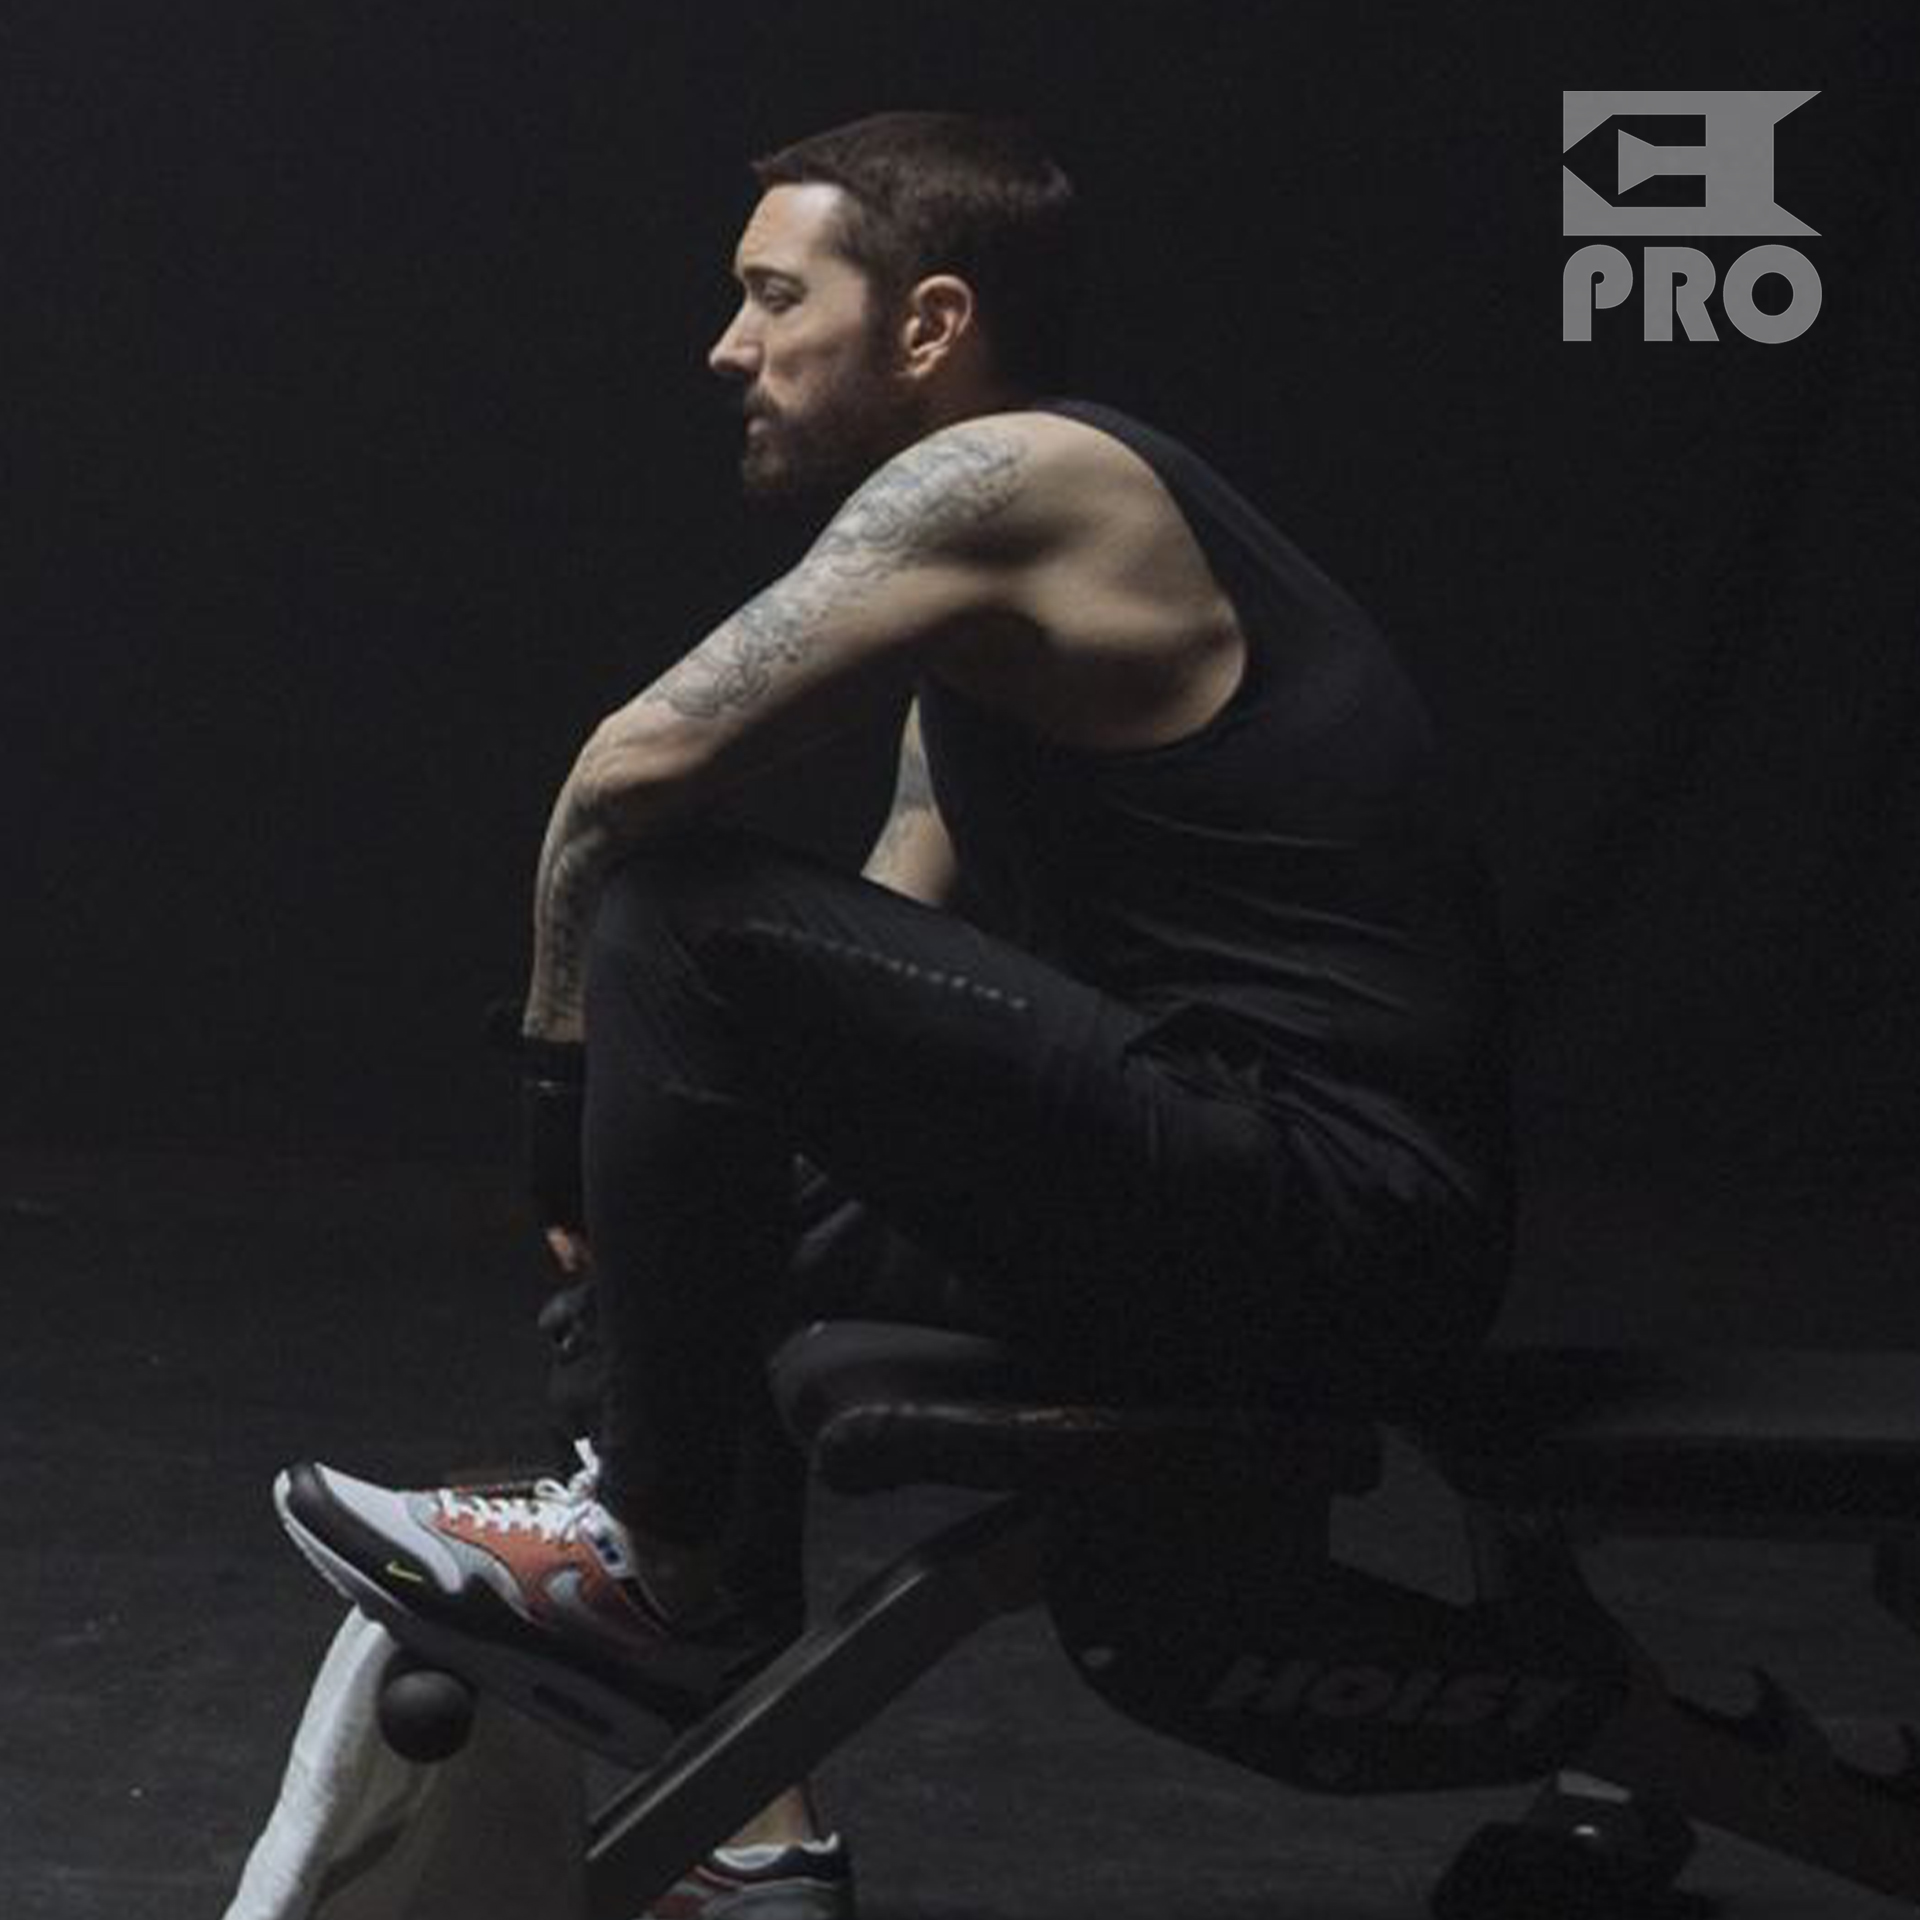 Hi-Res Backstage Photos From Eminem’s “Higher” Video (Exclusive)